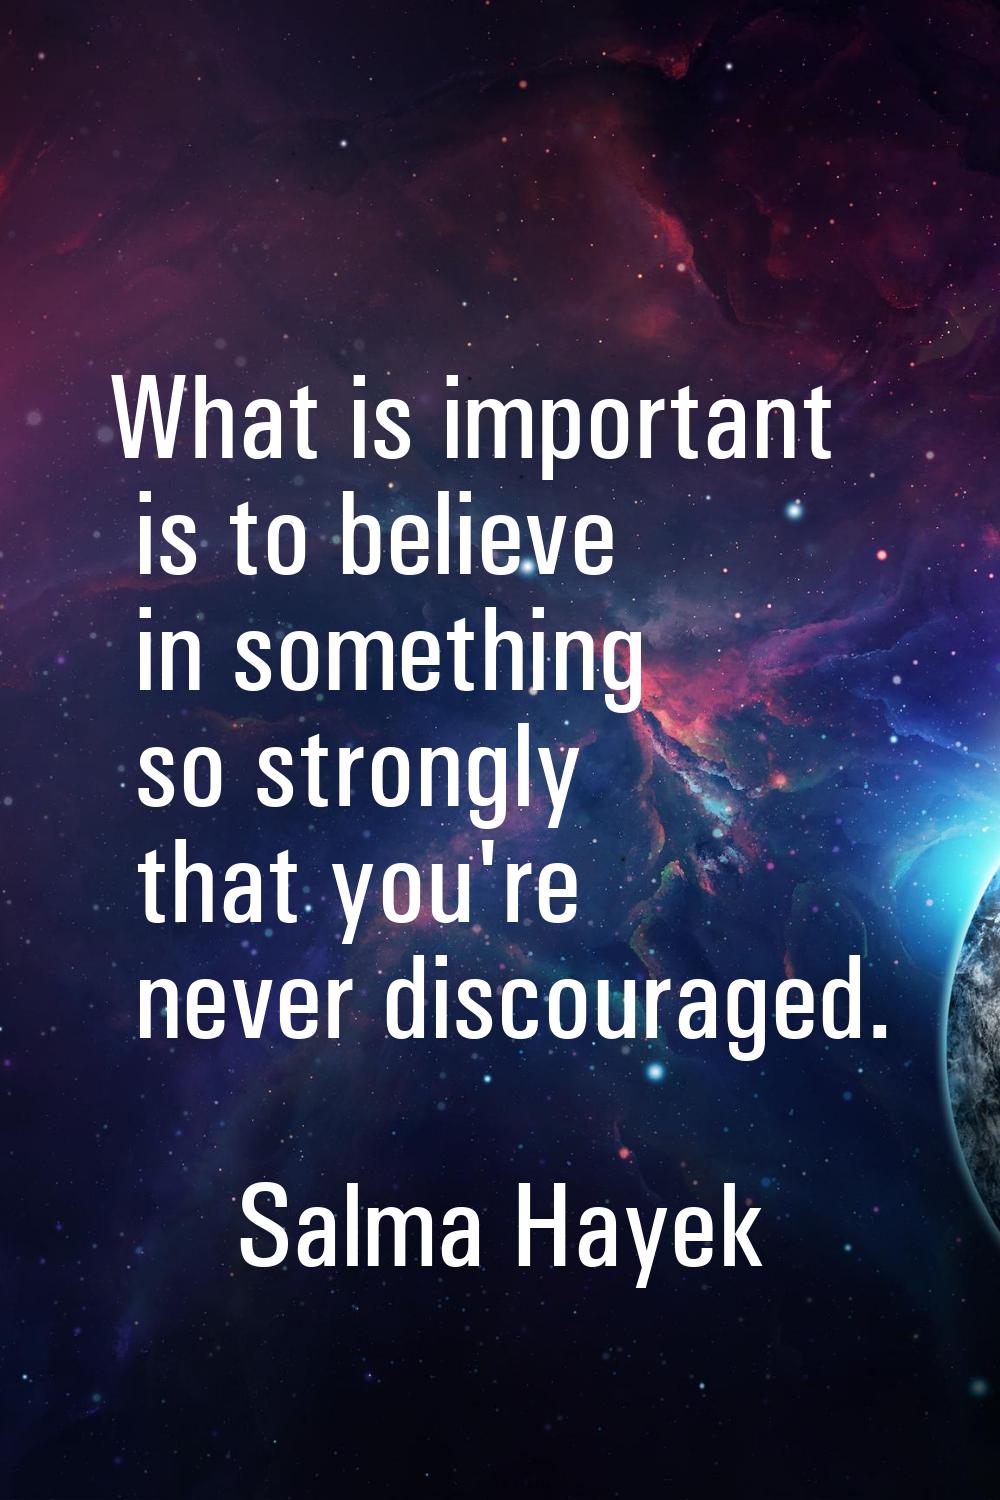 What is important is to believe in something so strongly that you're never discouraged.